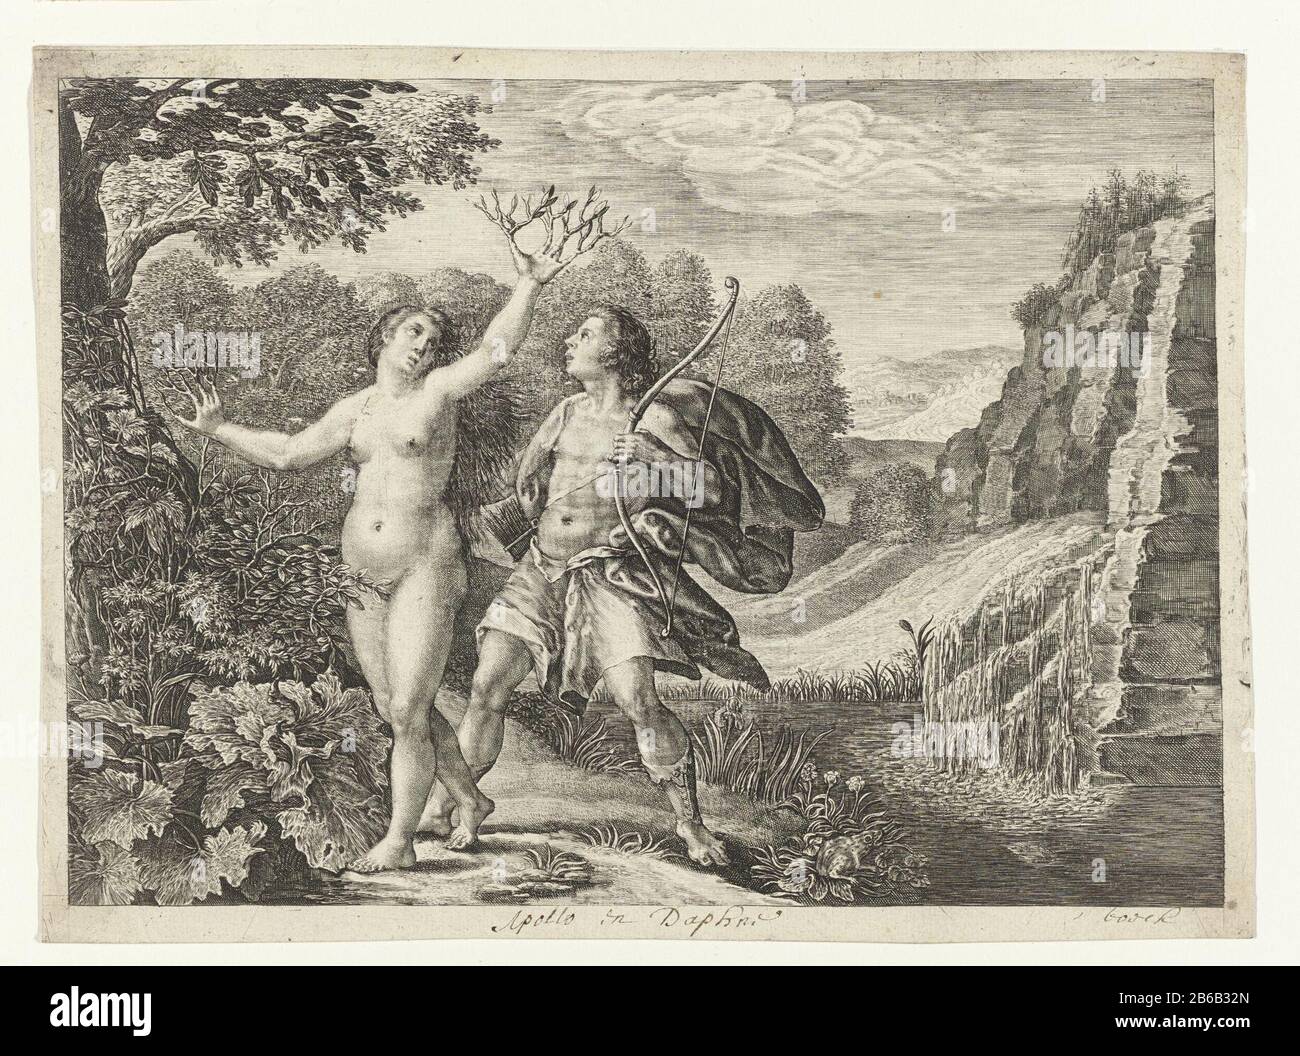 Apollo Chasing Daphne Metamorphoses of Ovid (series title) Apollo was in love at the hands of Cupid with the nymph Daphne and chases her. She prays for her father to save Where: after laurel branches sprout from her arms raised and a tree verandert. Manufacturer : printmaker: Crispijn of Passe (I) (listed building) printmaker: Magdalena van de Passe (rejected attribution) publisher: Crispijn of Passe (I) (attributed to) publisher: Crispijn of Passe (II) (attributed to) Date: ca. 1636 - 1670 Physical features: engra; proofing material: paper Technique: engra (printing process) Dimensions: h 173 Stock Photo